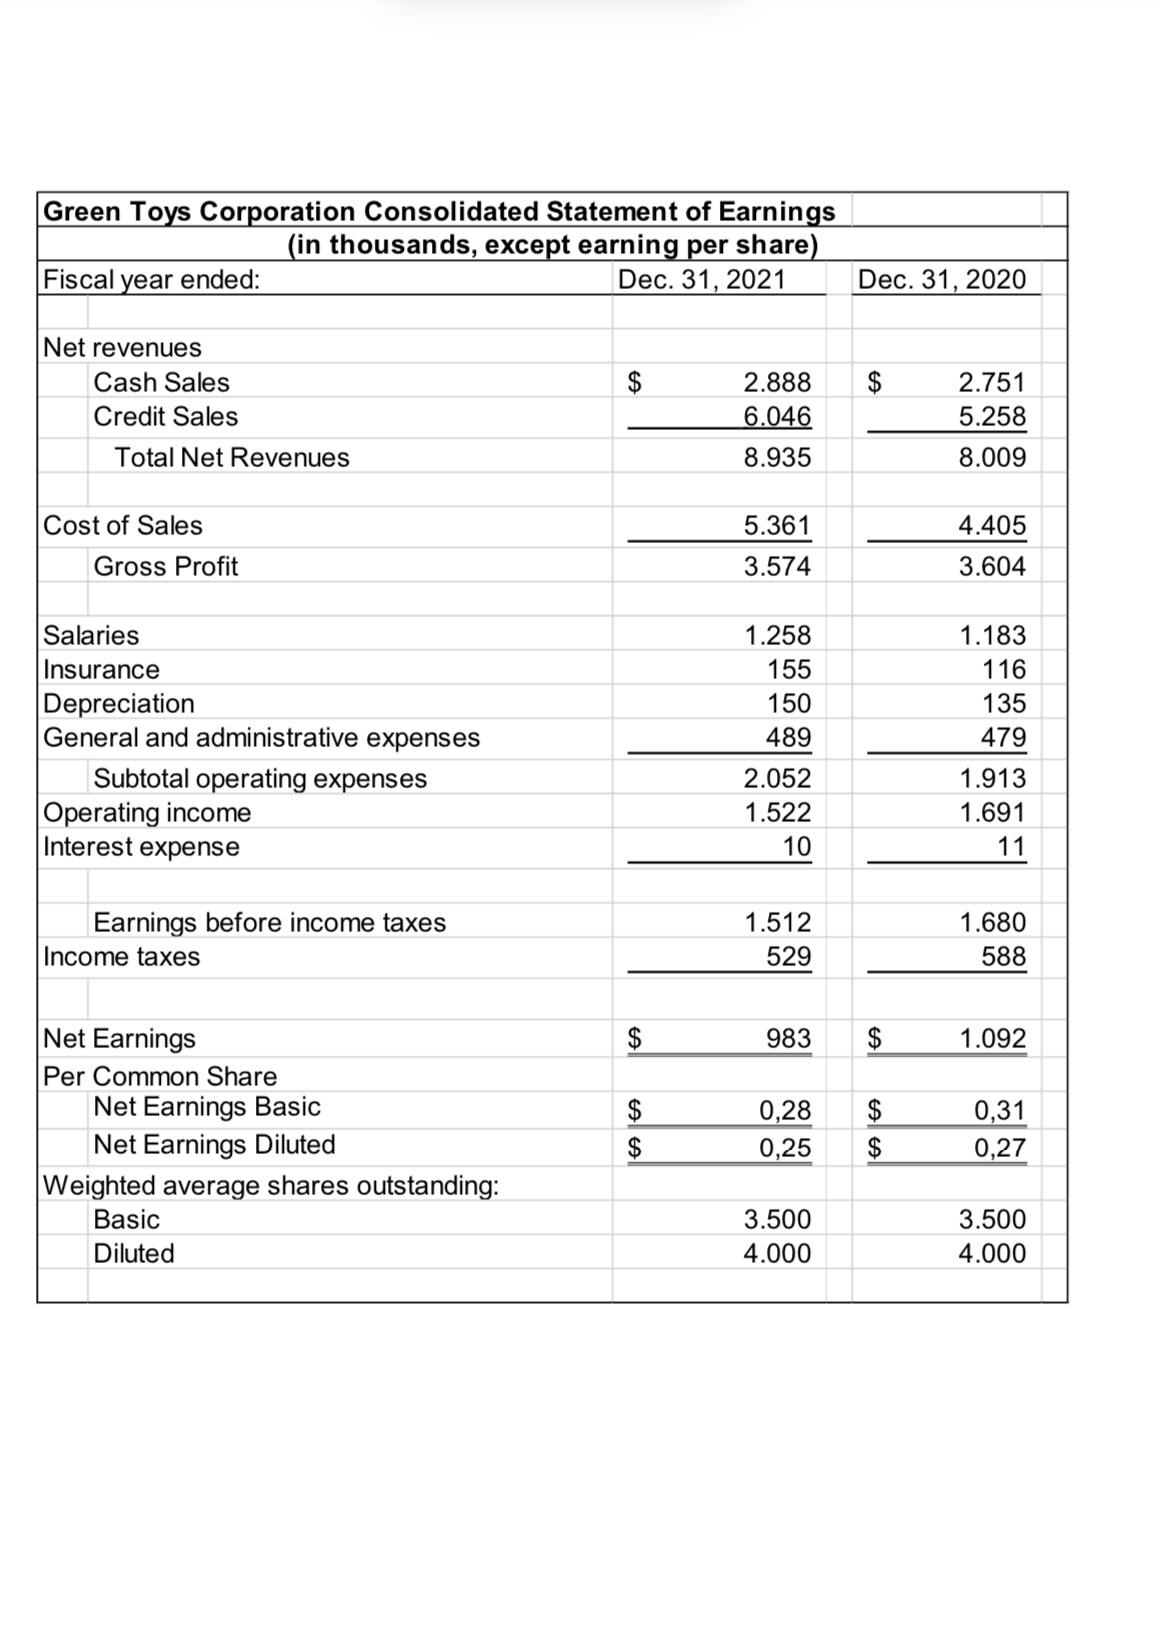 Green Toys Corporation Consolidated Statement of Earnings (in thousands, except earning per share) Dec. 31,